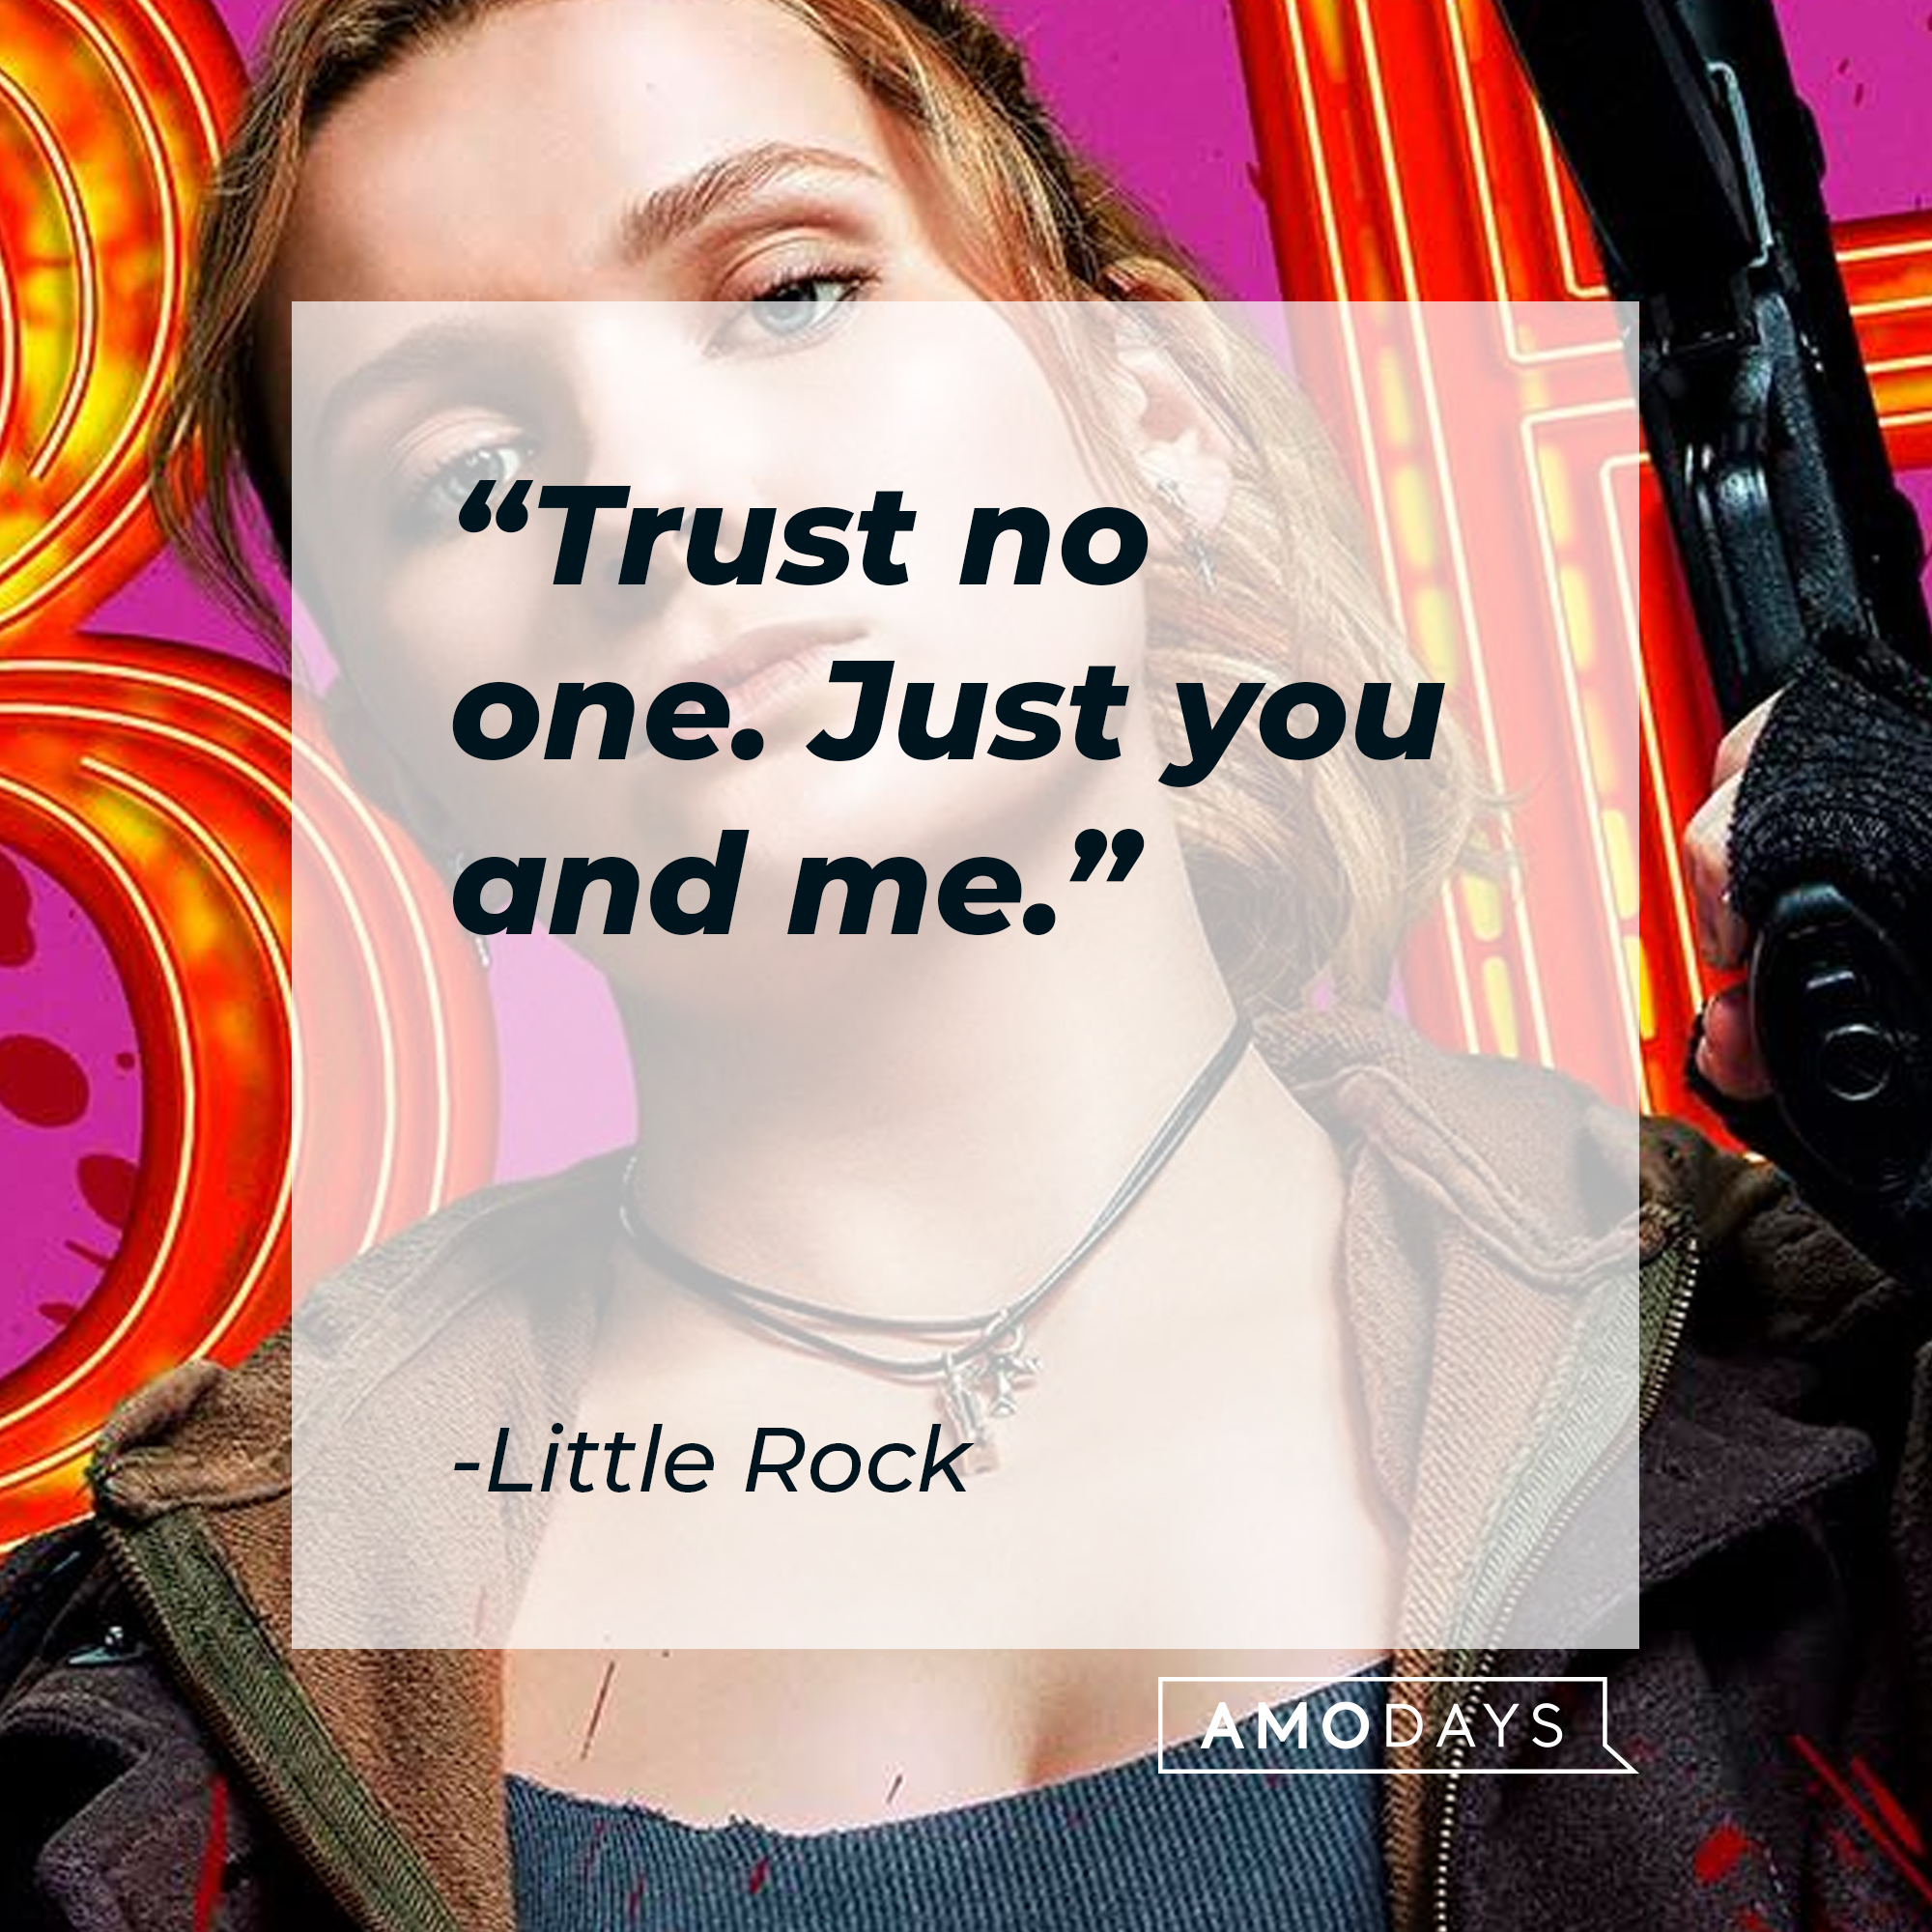 Little Rock's quote: "Trust no one. Just you and me." | Source: Facebook.com/Zombieland